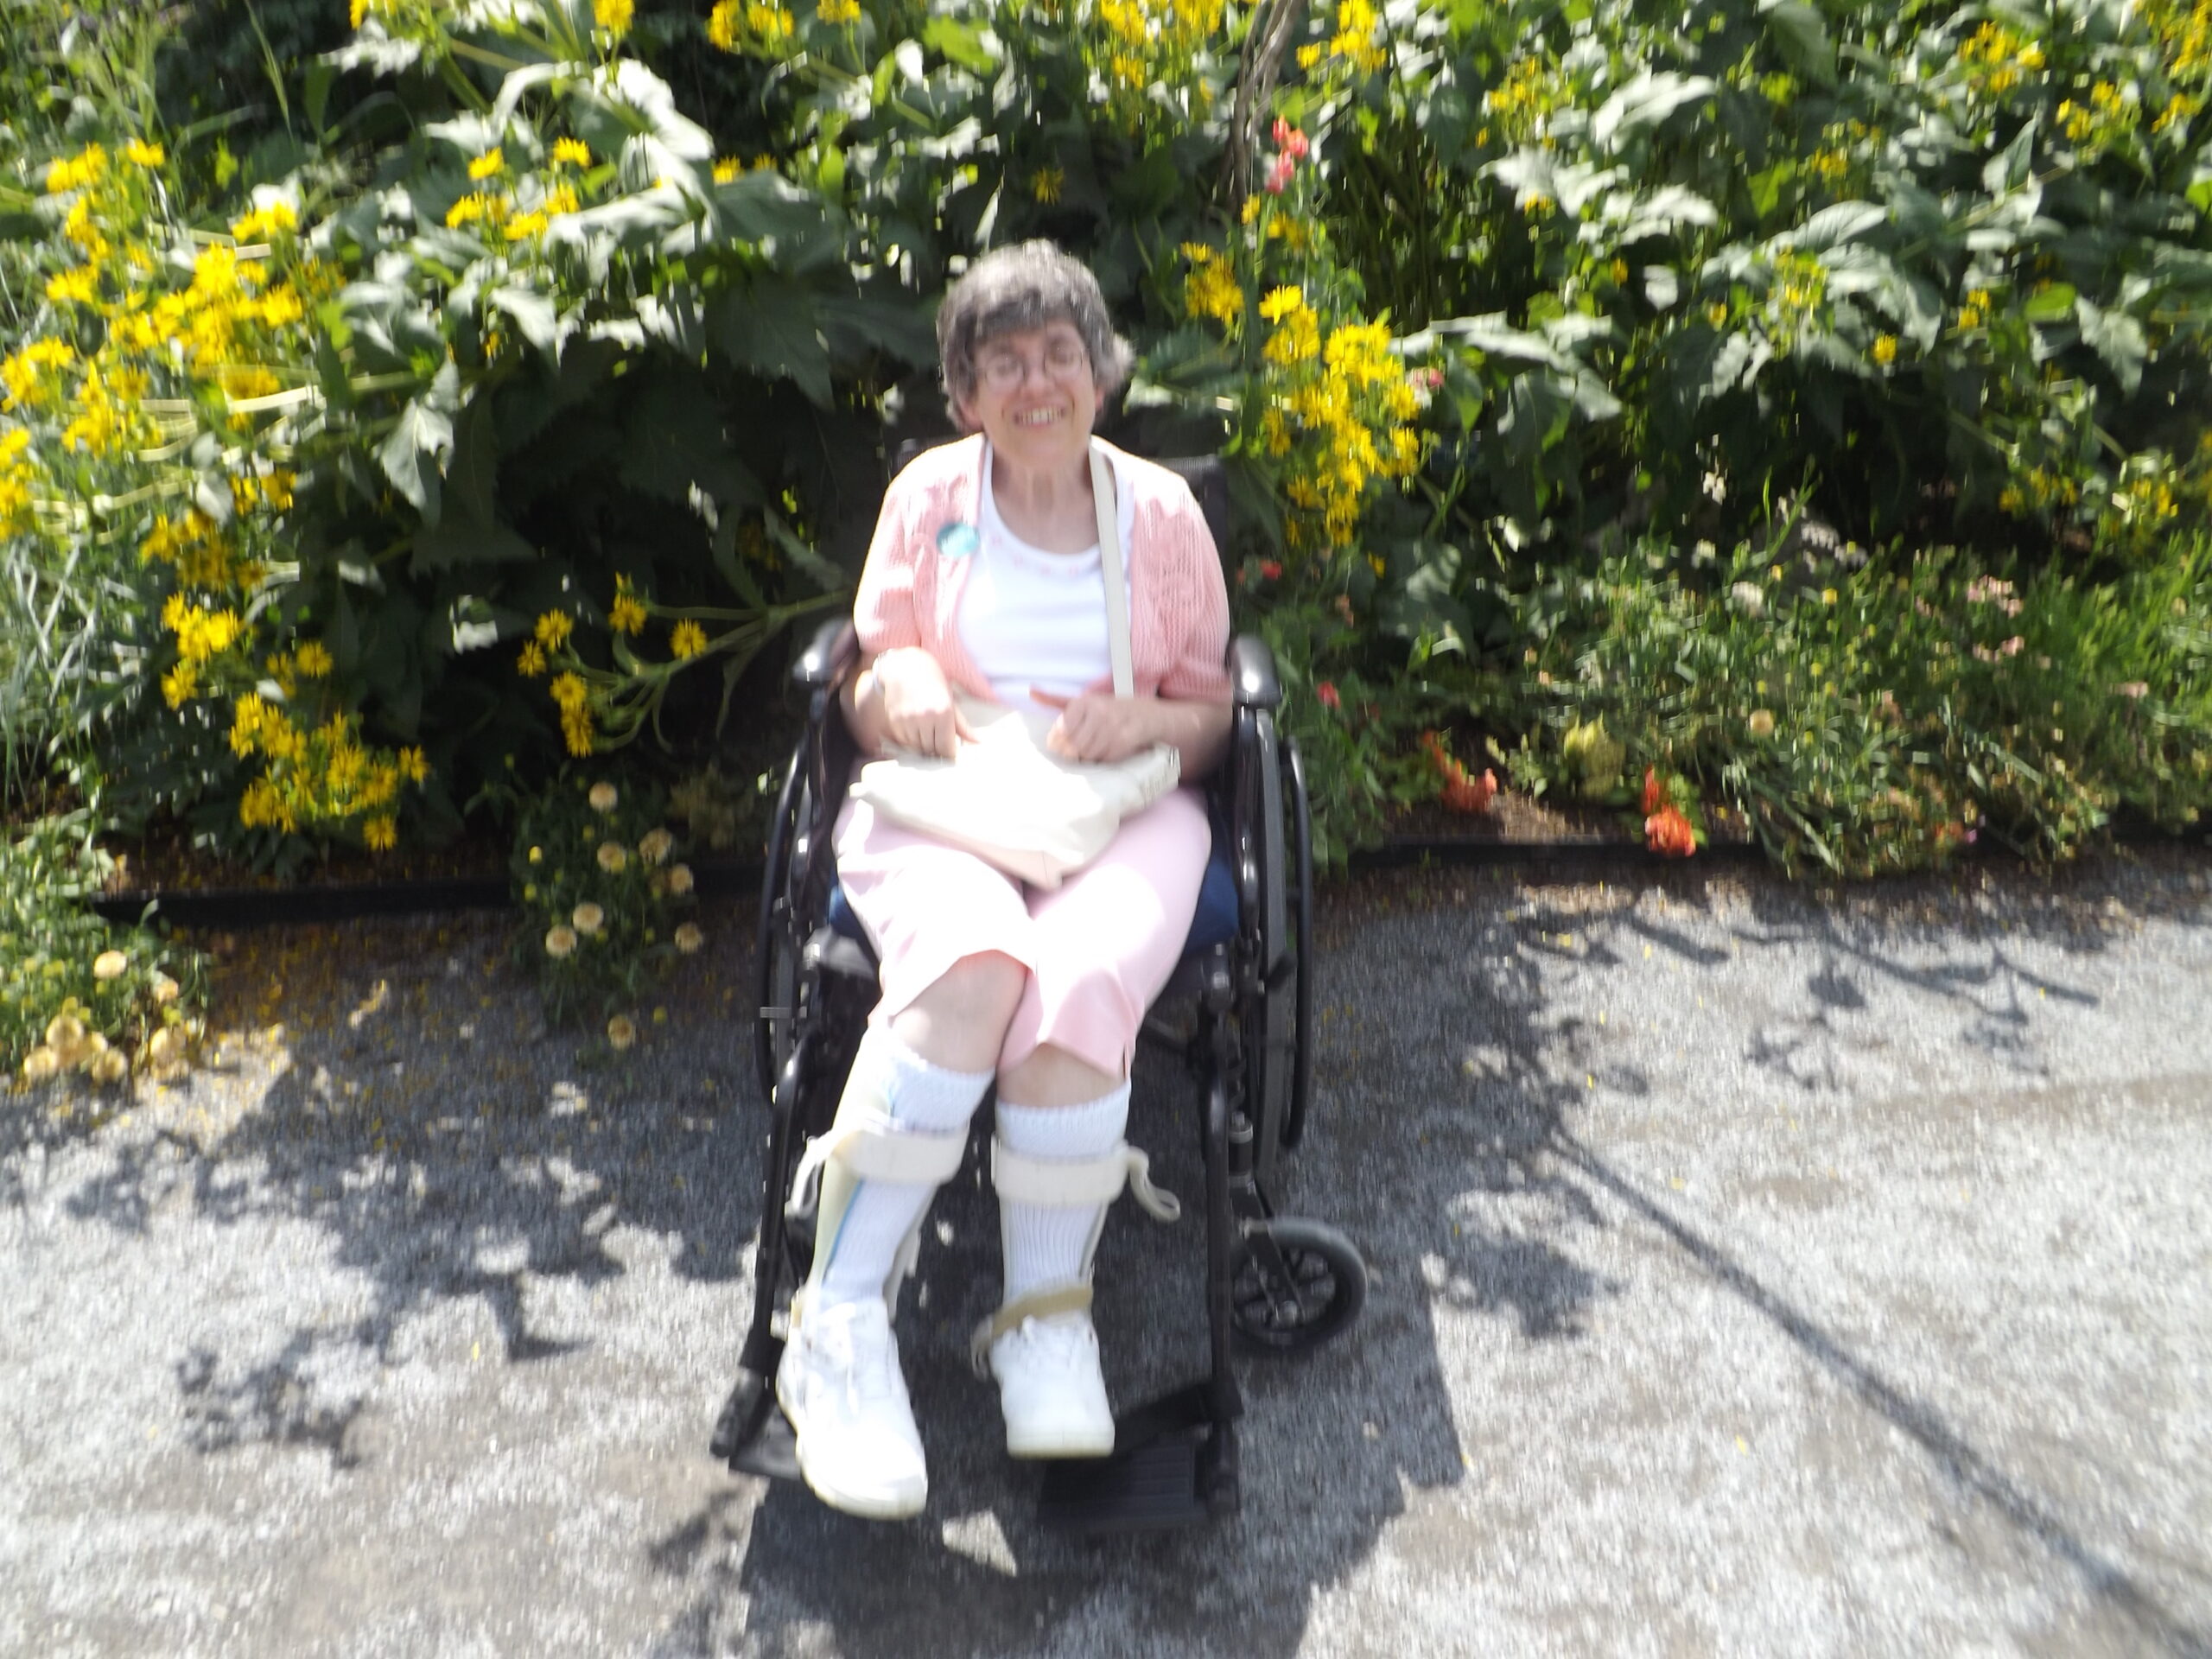 Sarah sits in her powered wheelchair at the botanical garden, in front of a swath of flowers and leaves